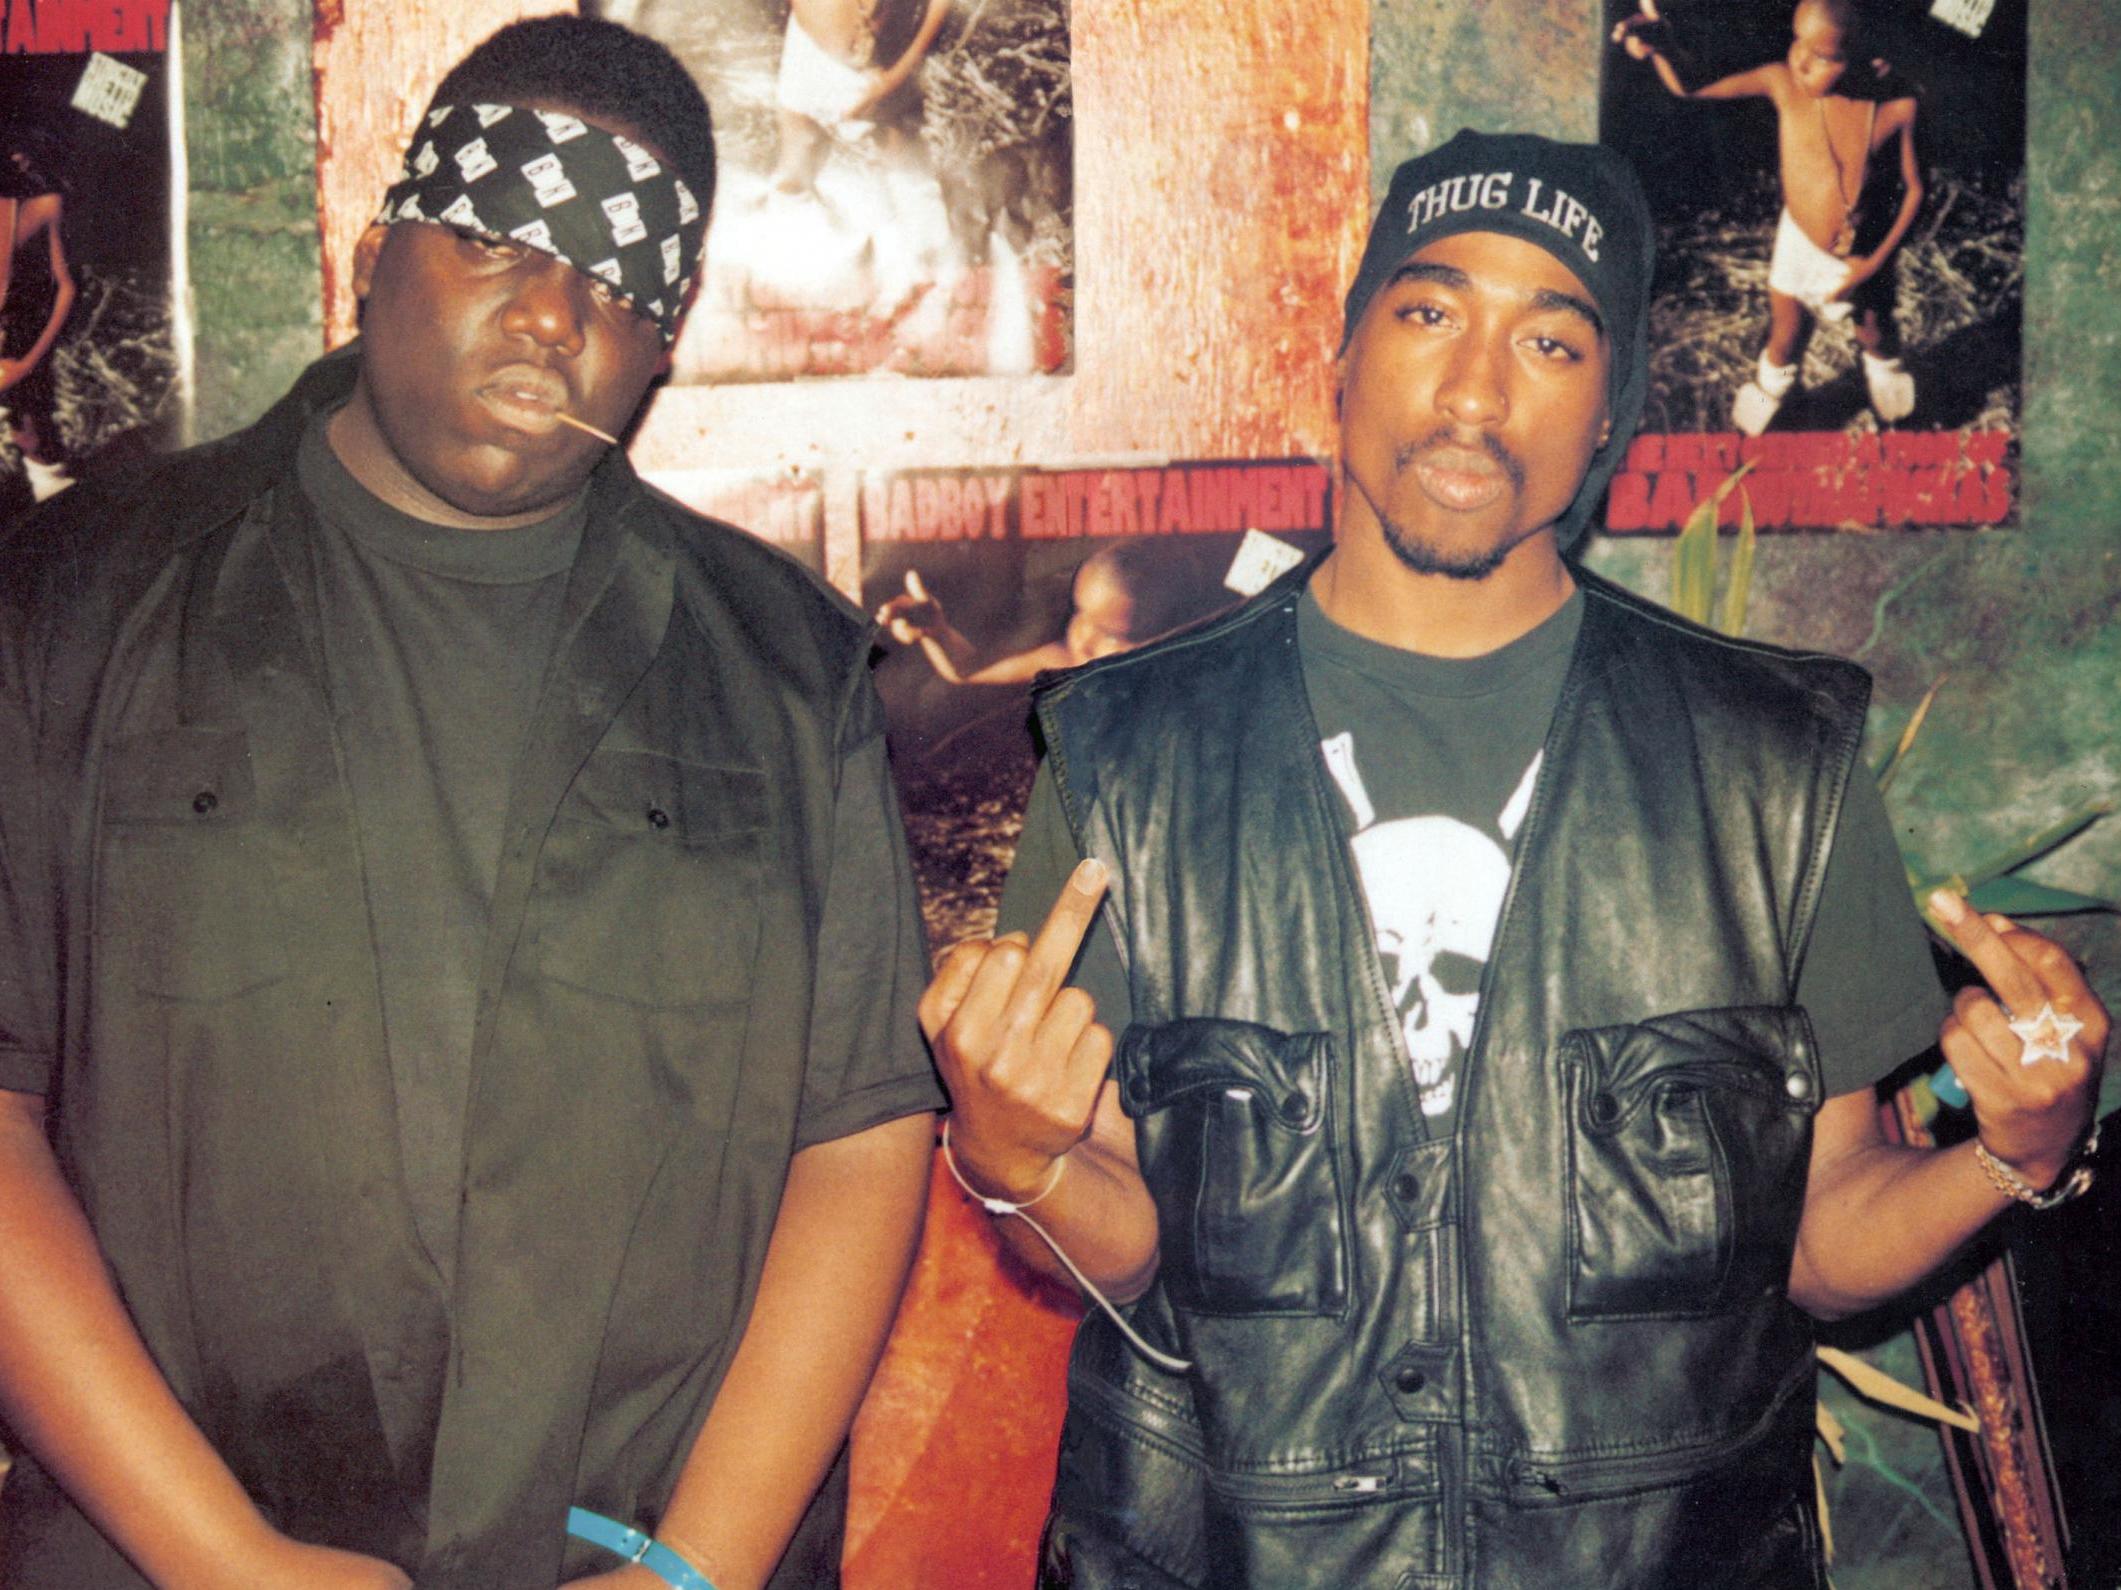 Biggie Smalls and Tupac Shakur before the feud